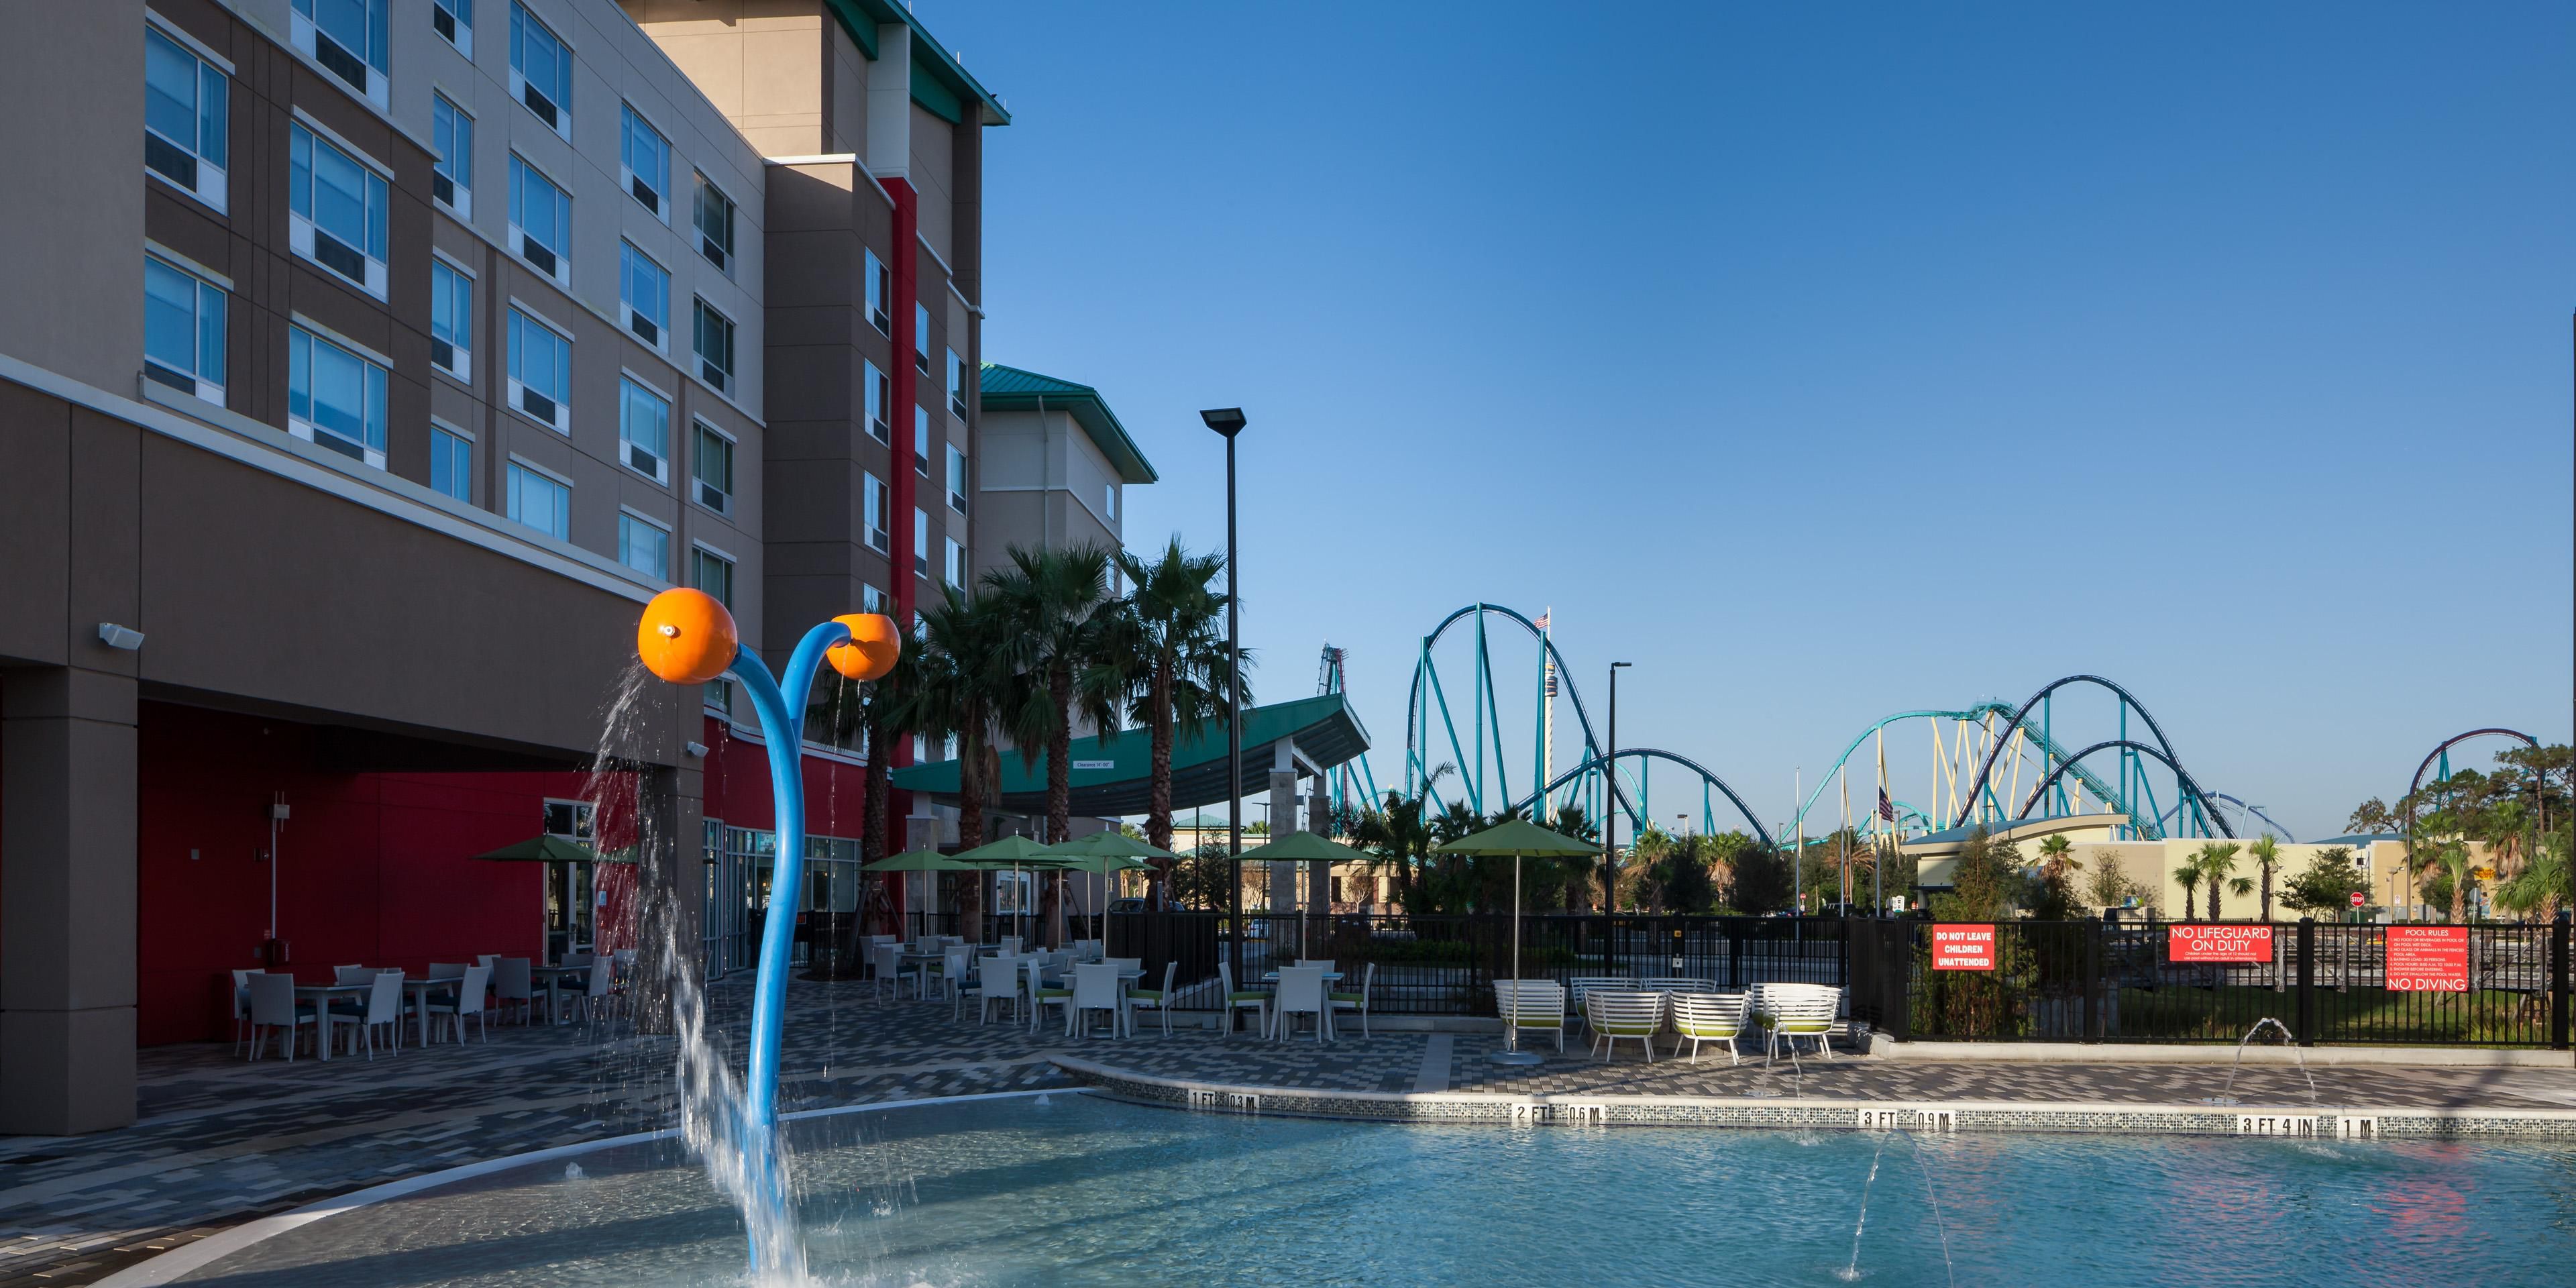 Sunny skies call you to our zero entry pool and splash pad!